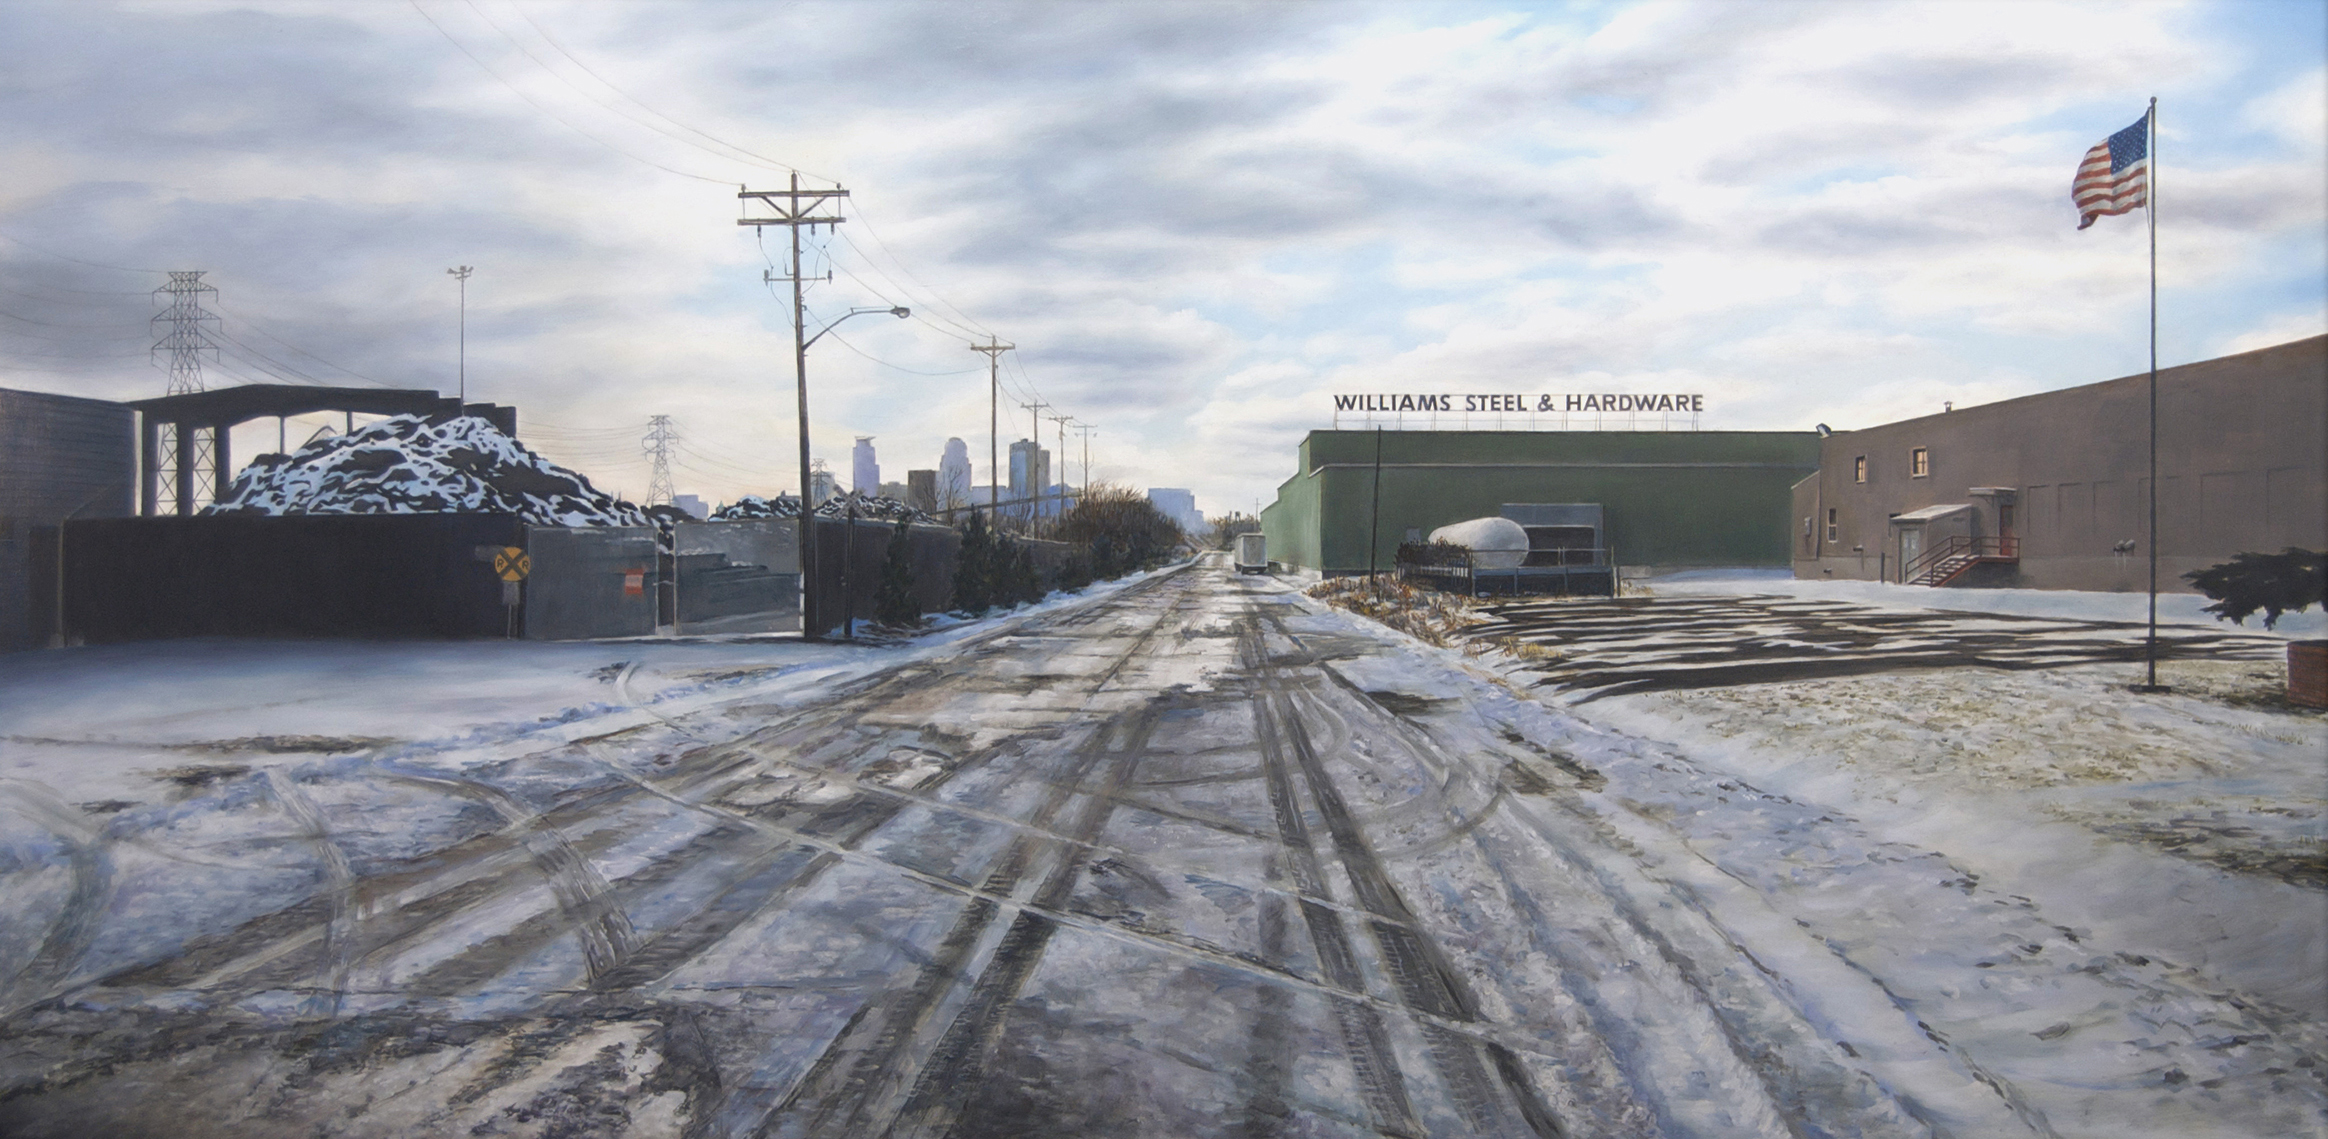   North Pacific Street,     Minneapolis, Winter   2014  Oil on panel  23.5 x 48 inches    